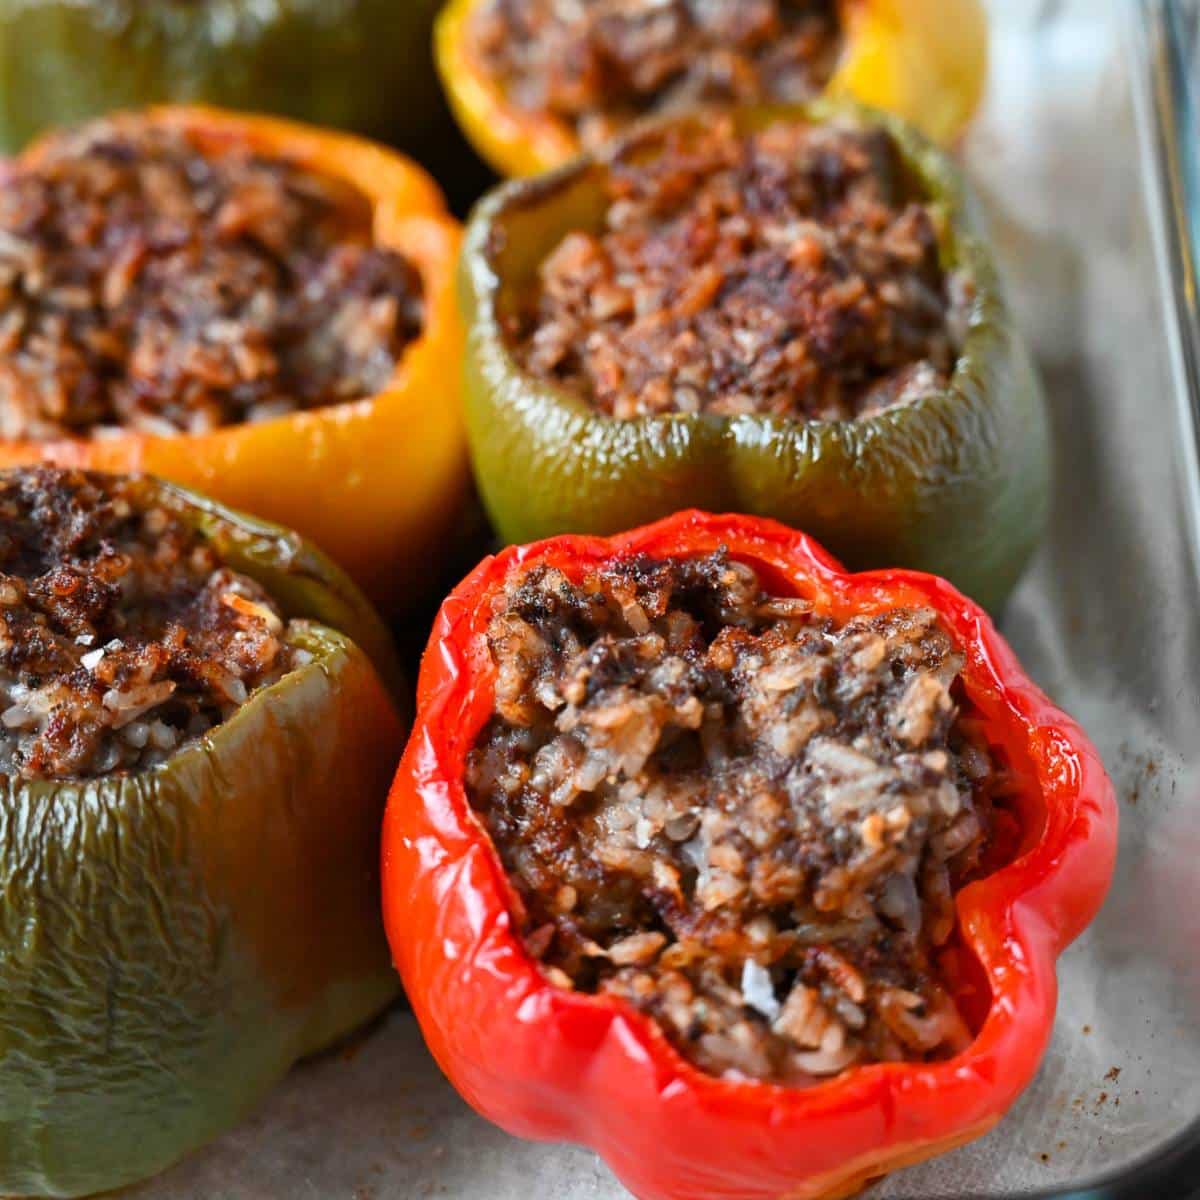 I Can't Feel My Face  Dinner recipes healthy low carb, Stuffed peppers,  Season steak recipes